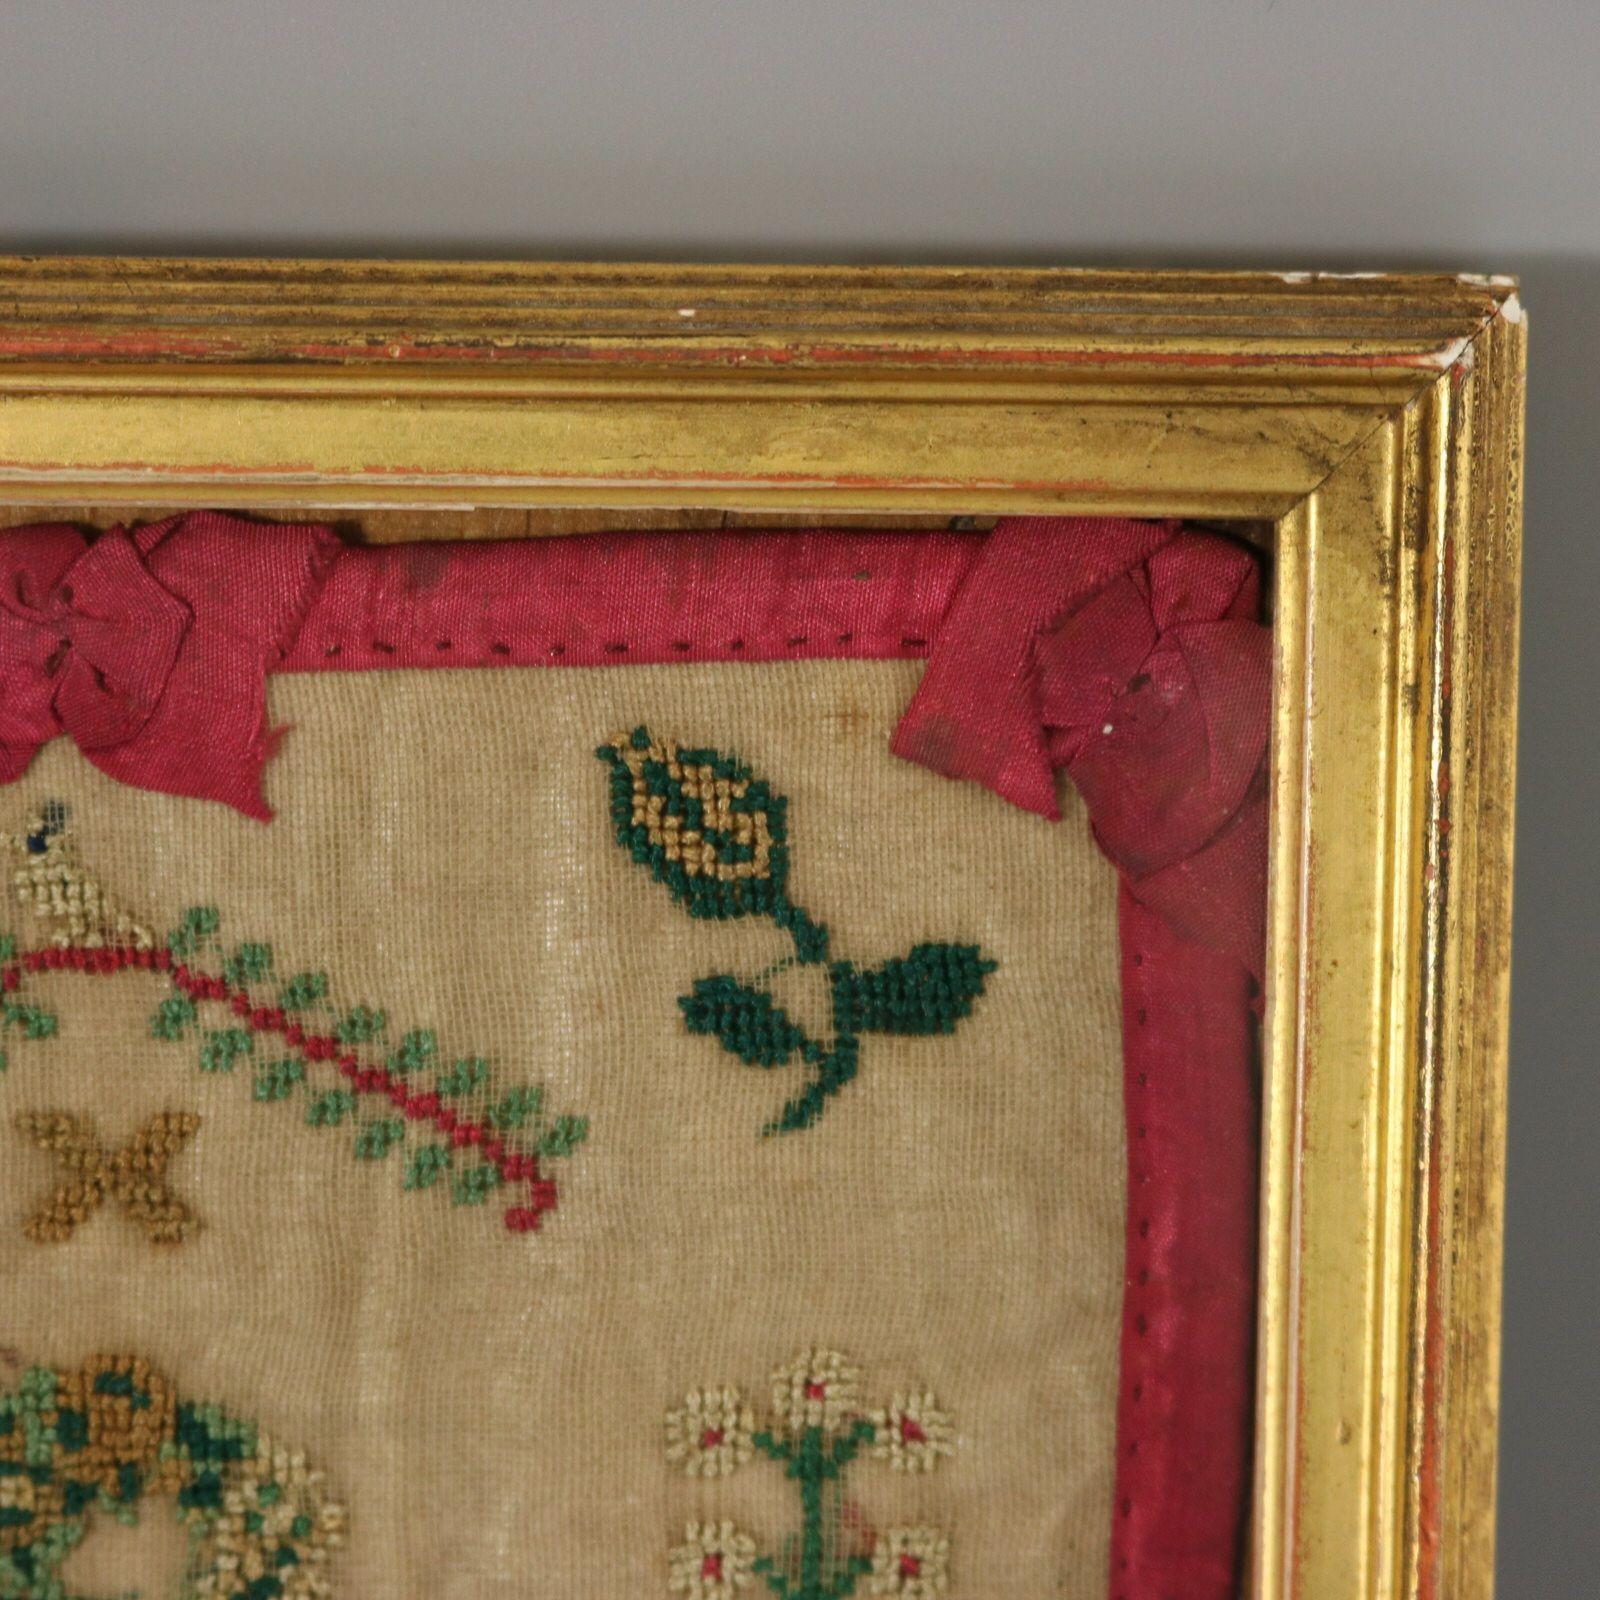 Antique Miniature Sampler, circa 1800, by Sophia Honey In Good Condition For Sale In Chelmsford, Essex